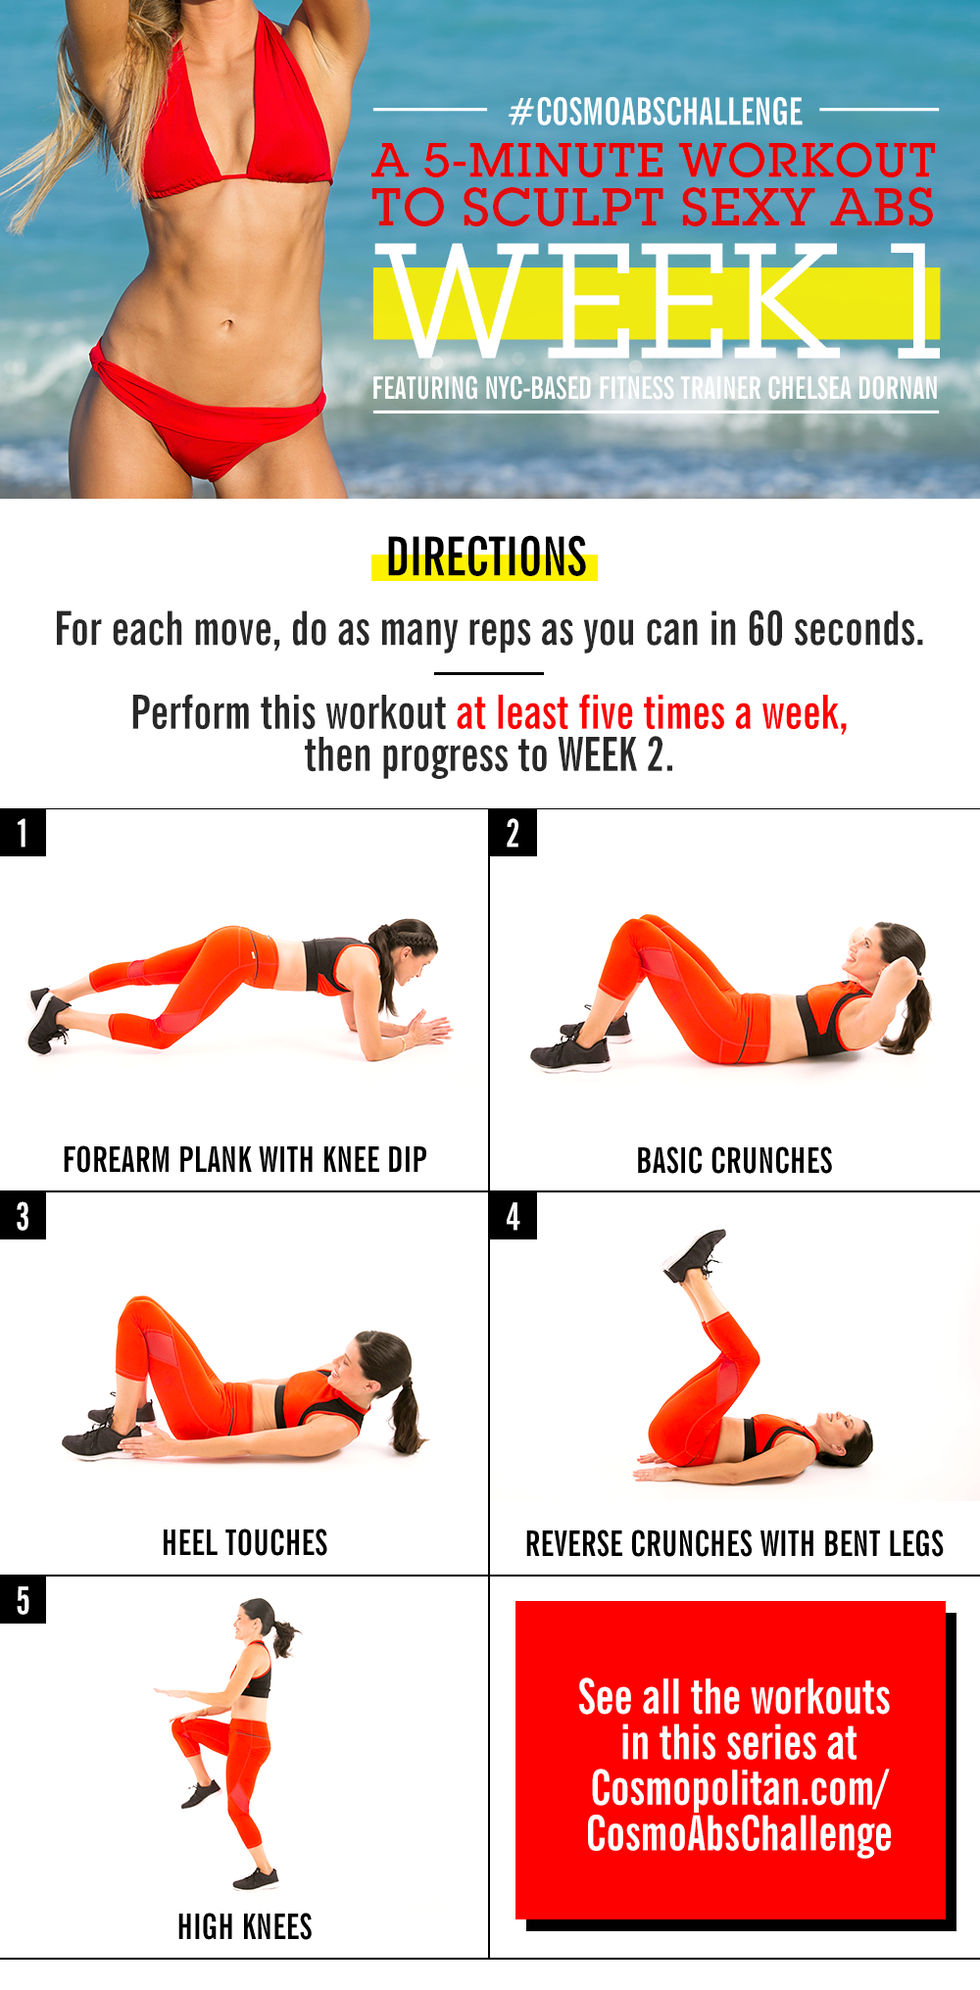 7 Exercises to Flatten Your Belly at Home - eMediHealth